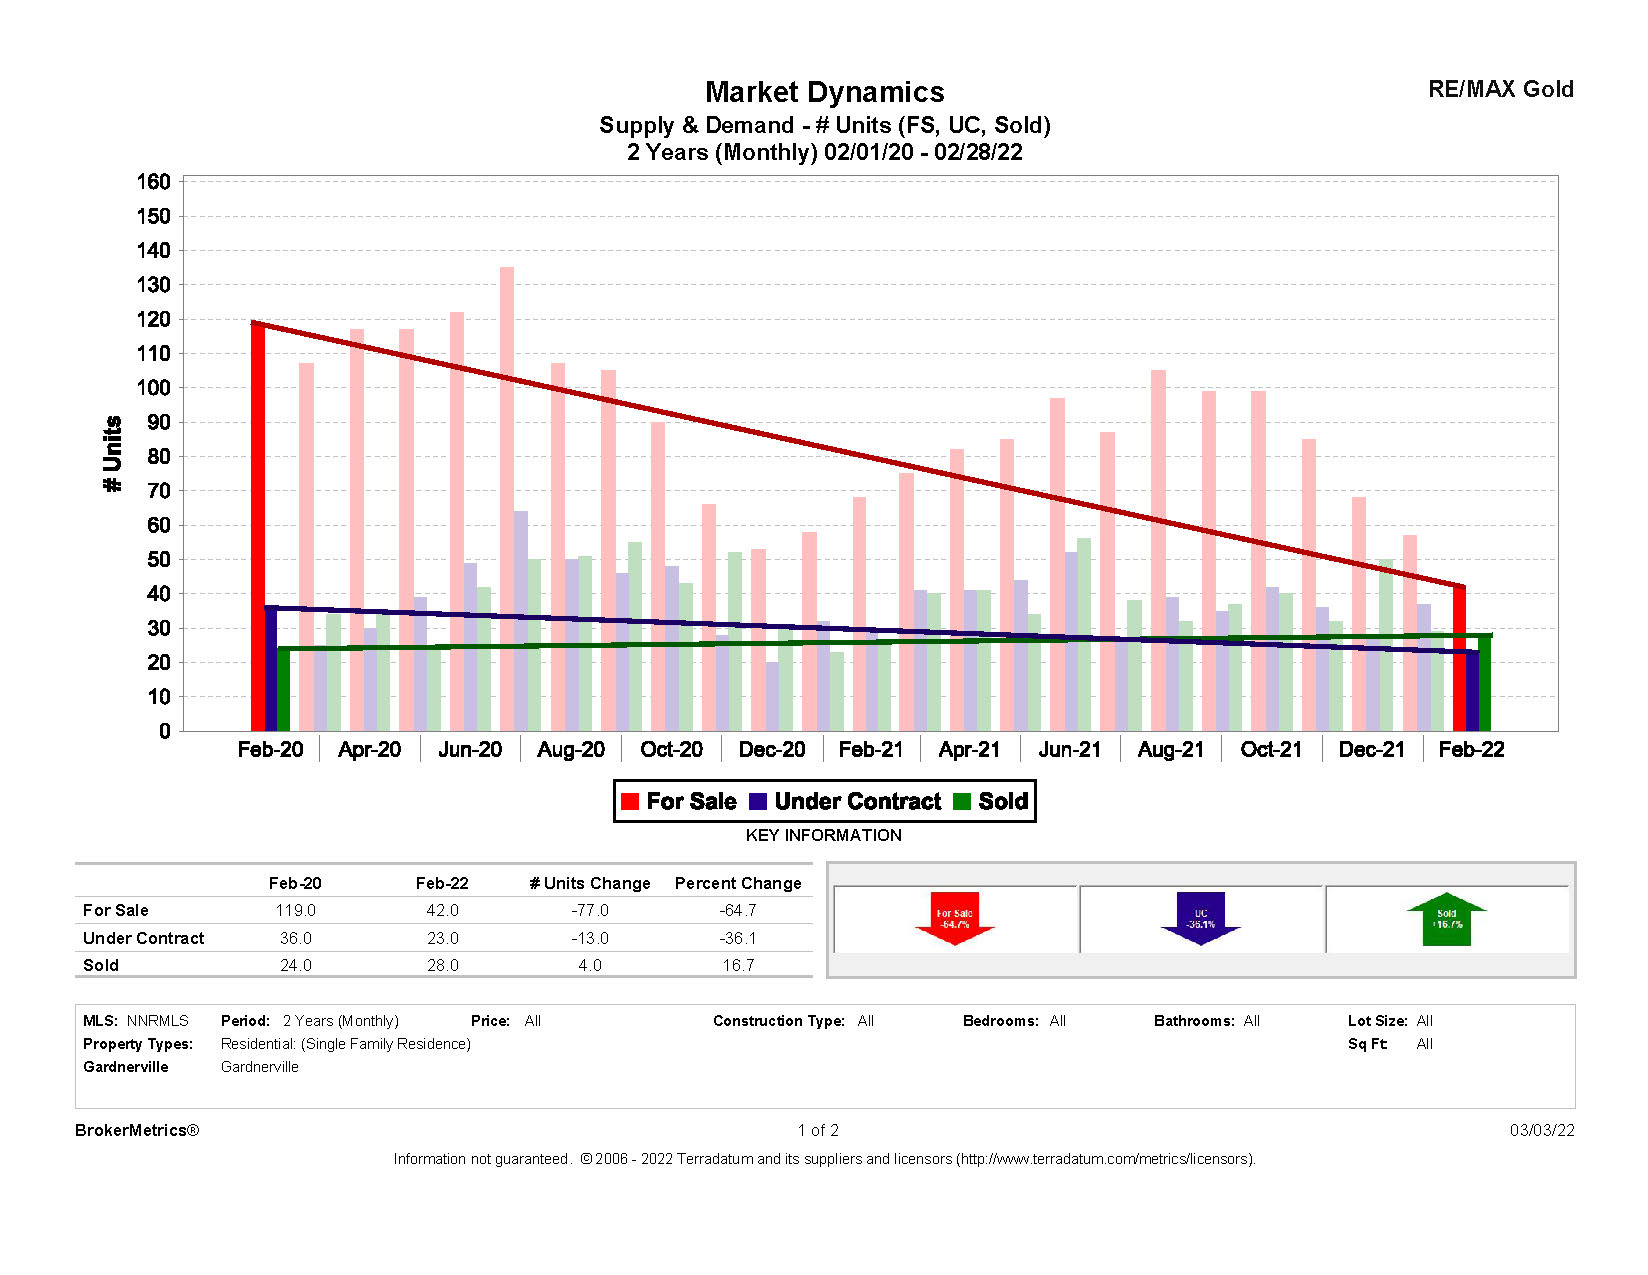 February Stats: Supply & Demand graph for Gardnerville, NV